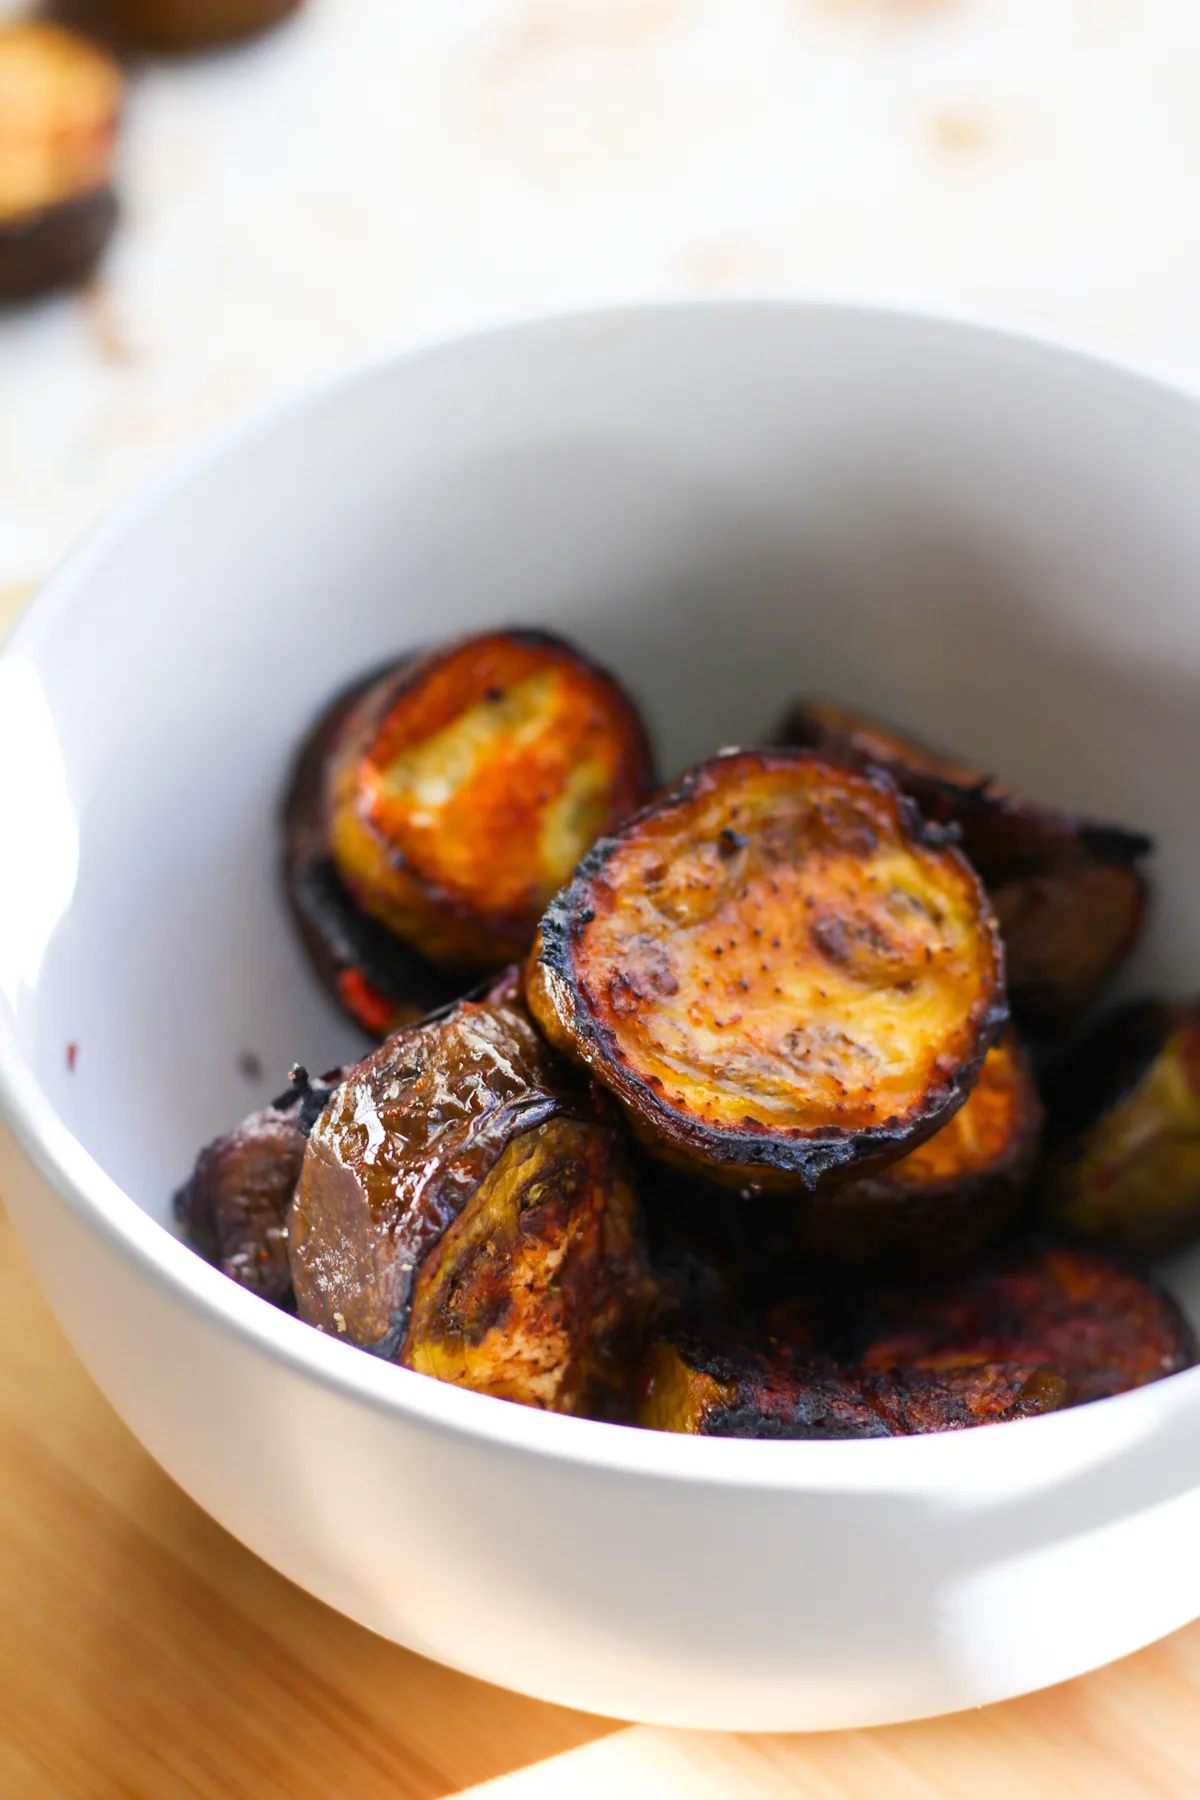 Roasted eggplant slices in a bowl.